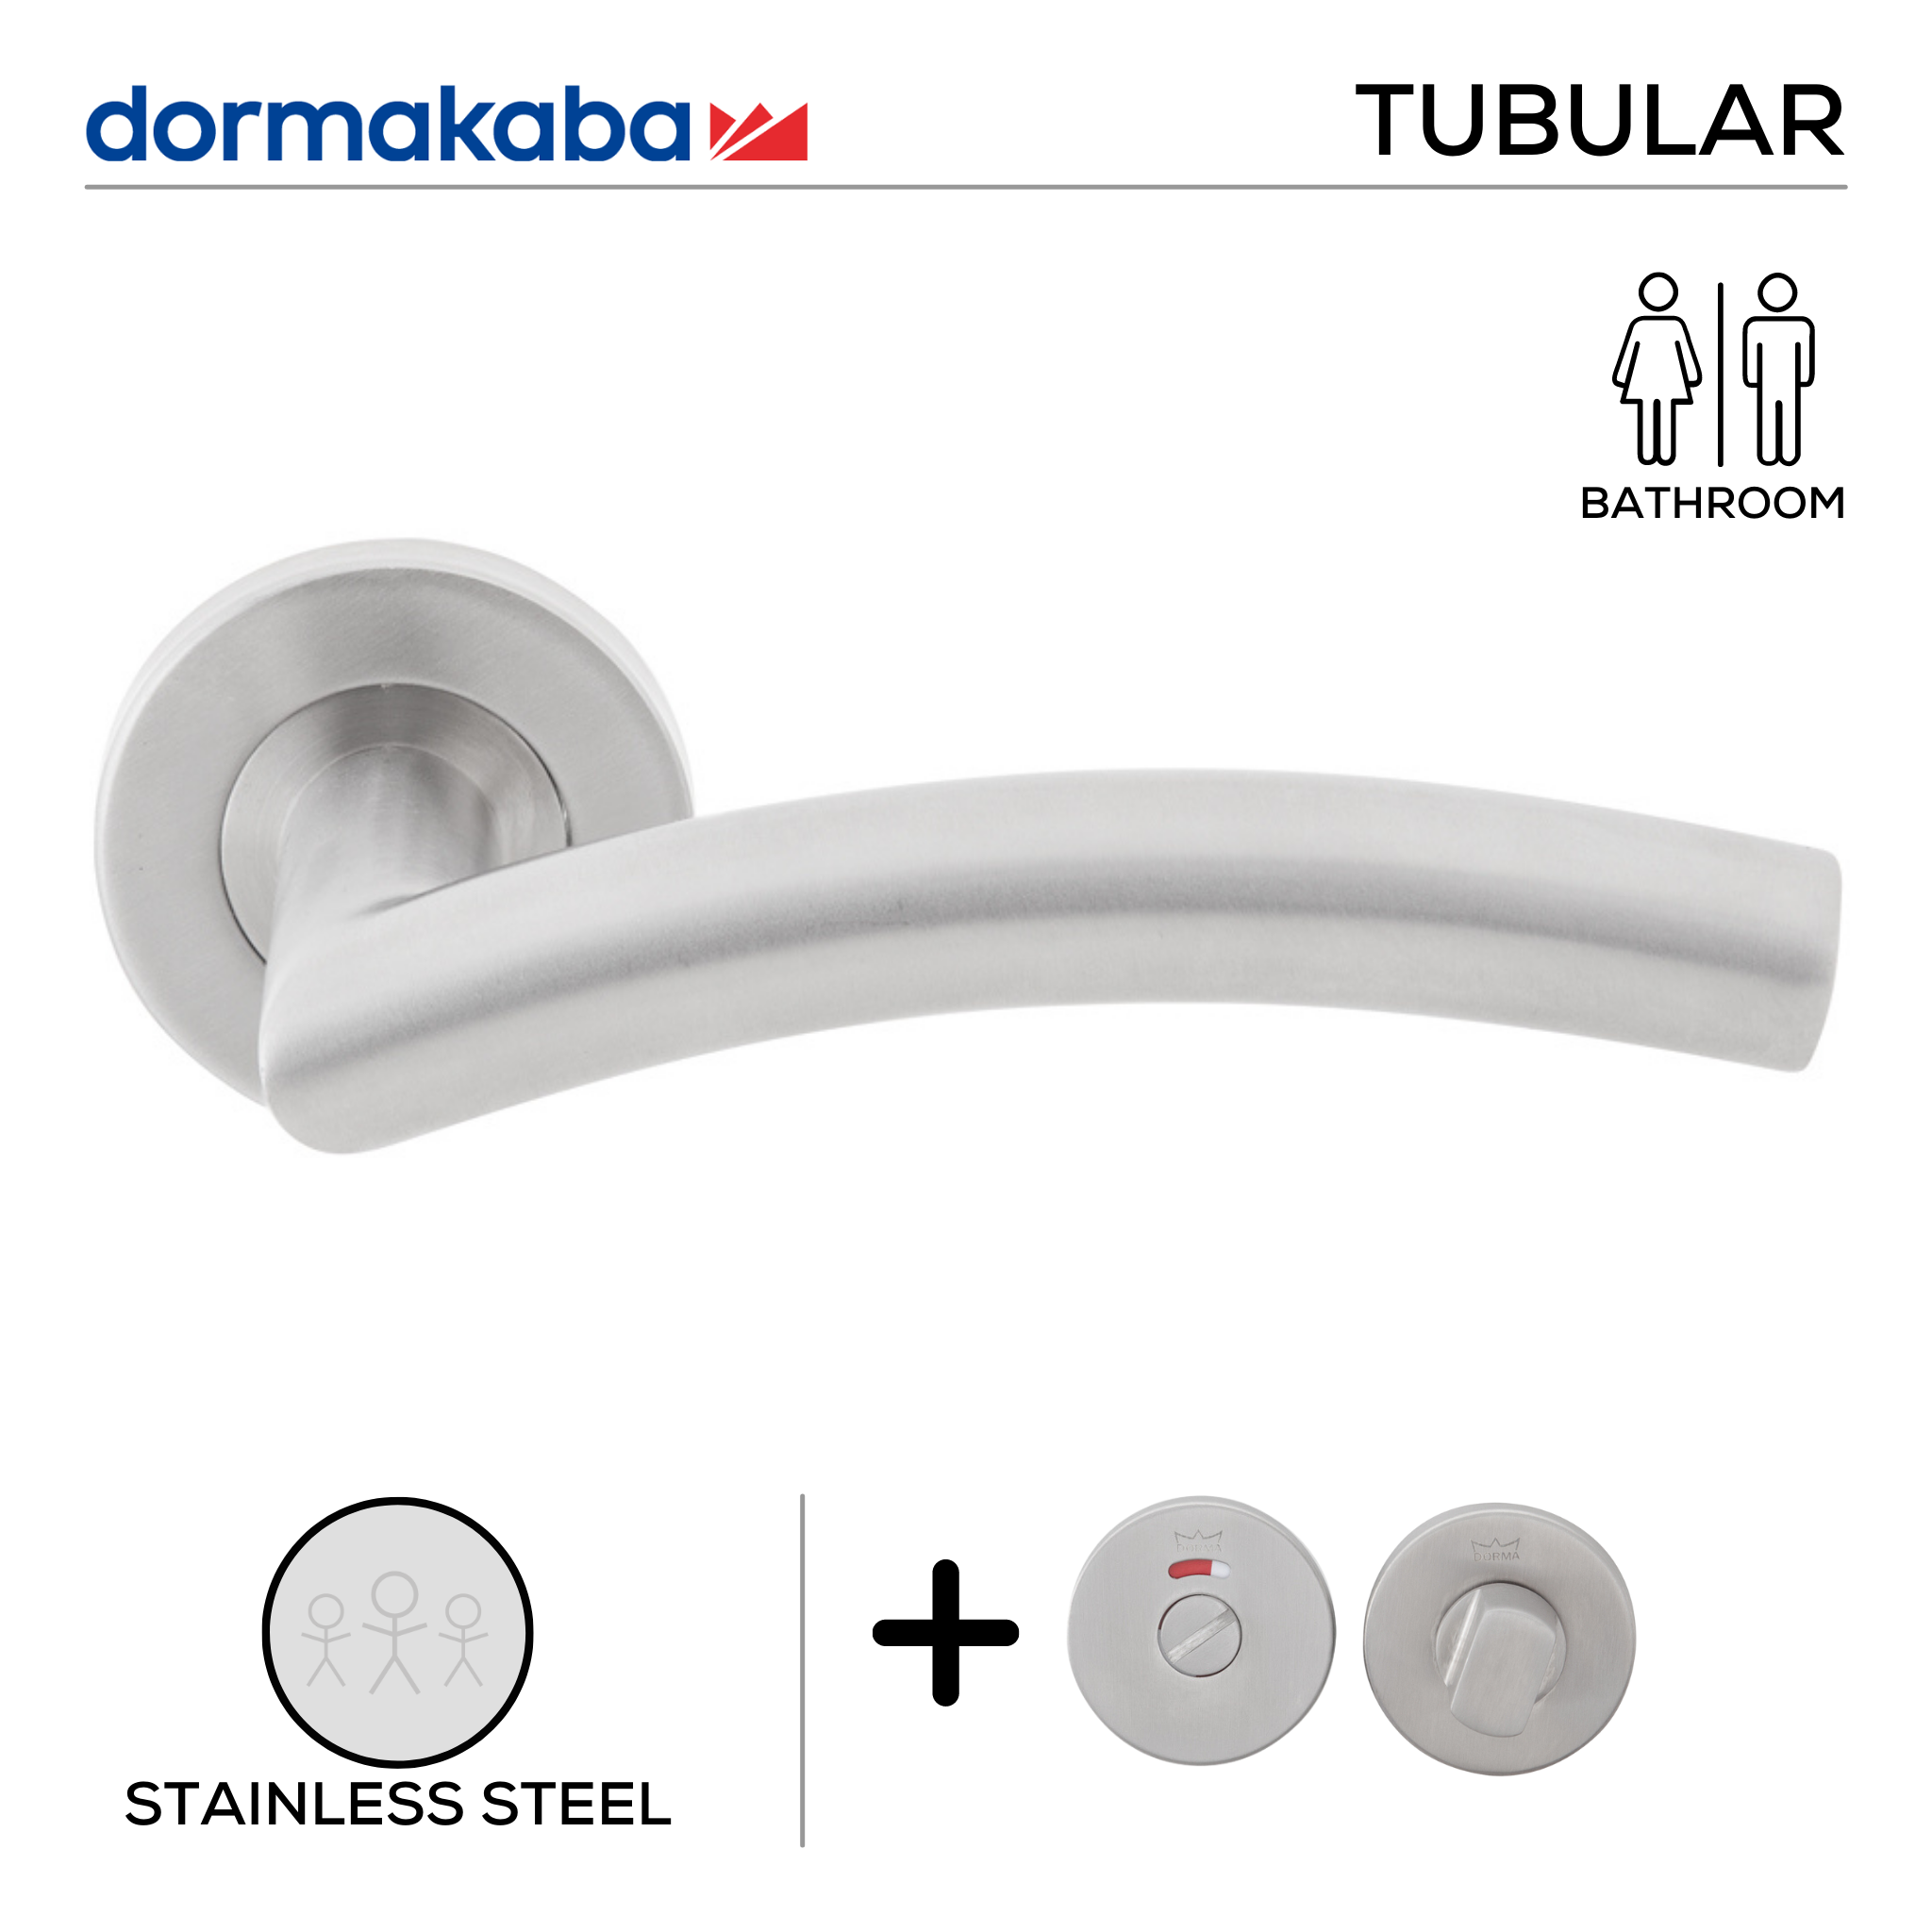 TH 123 Bathroom W/C, Lever Handles, Tubular, On Round Rose, With Bathroom (WC) Indicator Set - DWC 005, 143mm (l), Stainless Steel, DORMAKABA